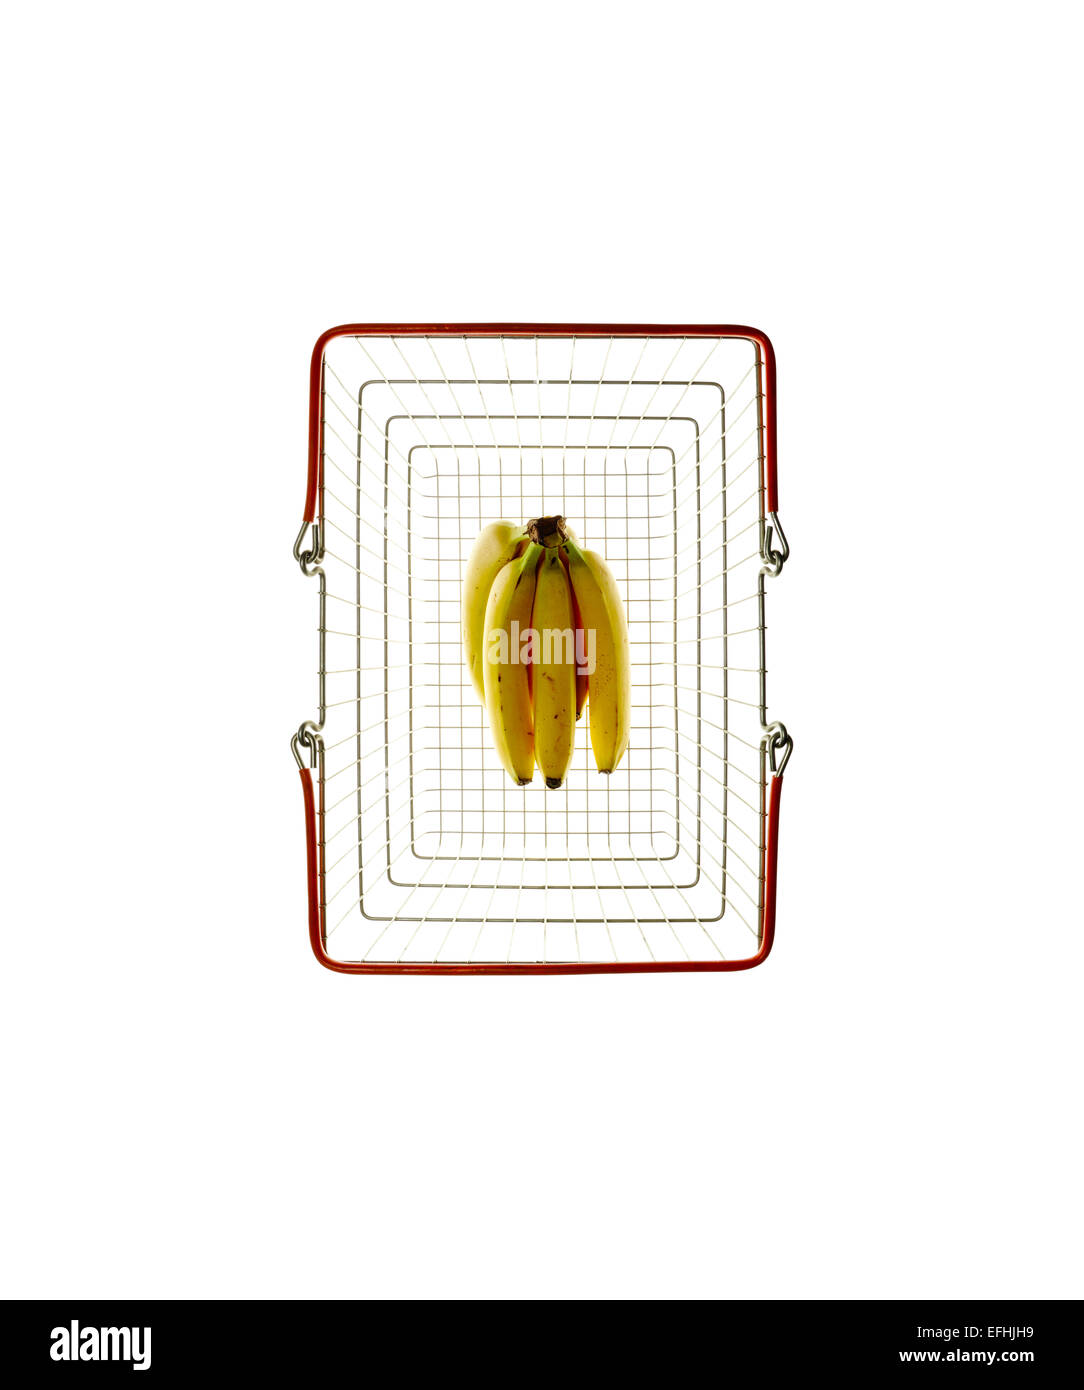 Shopping basket with bananas on a white background Stock Photo